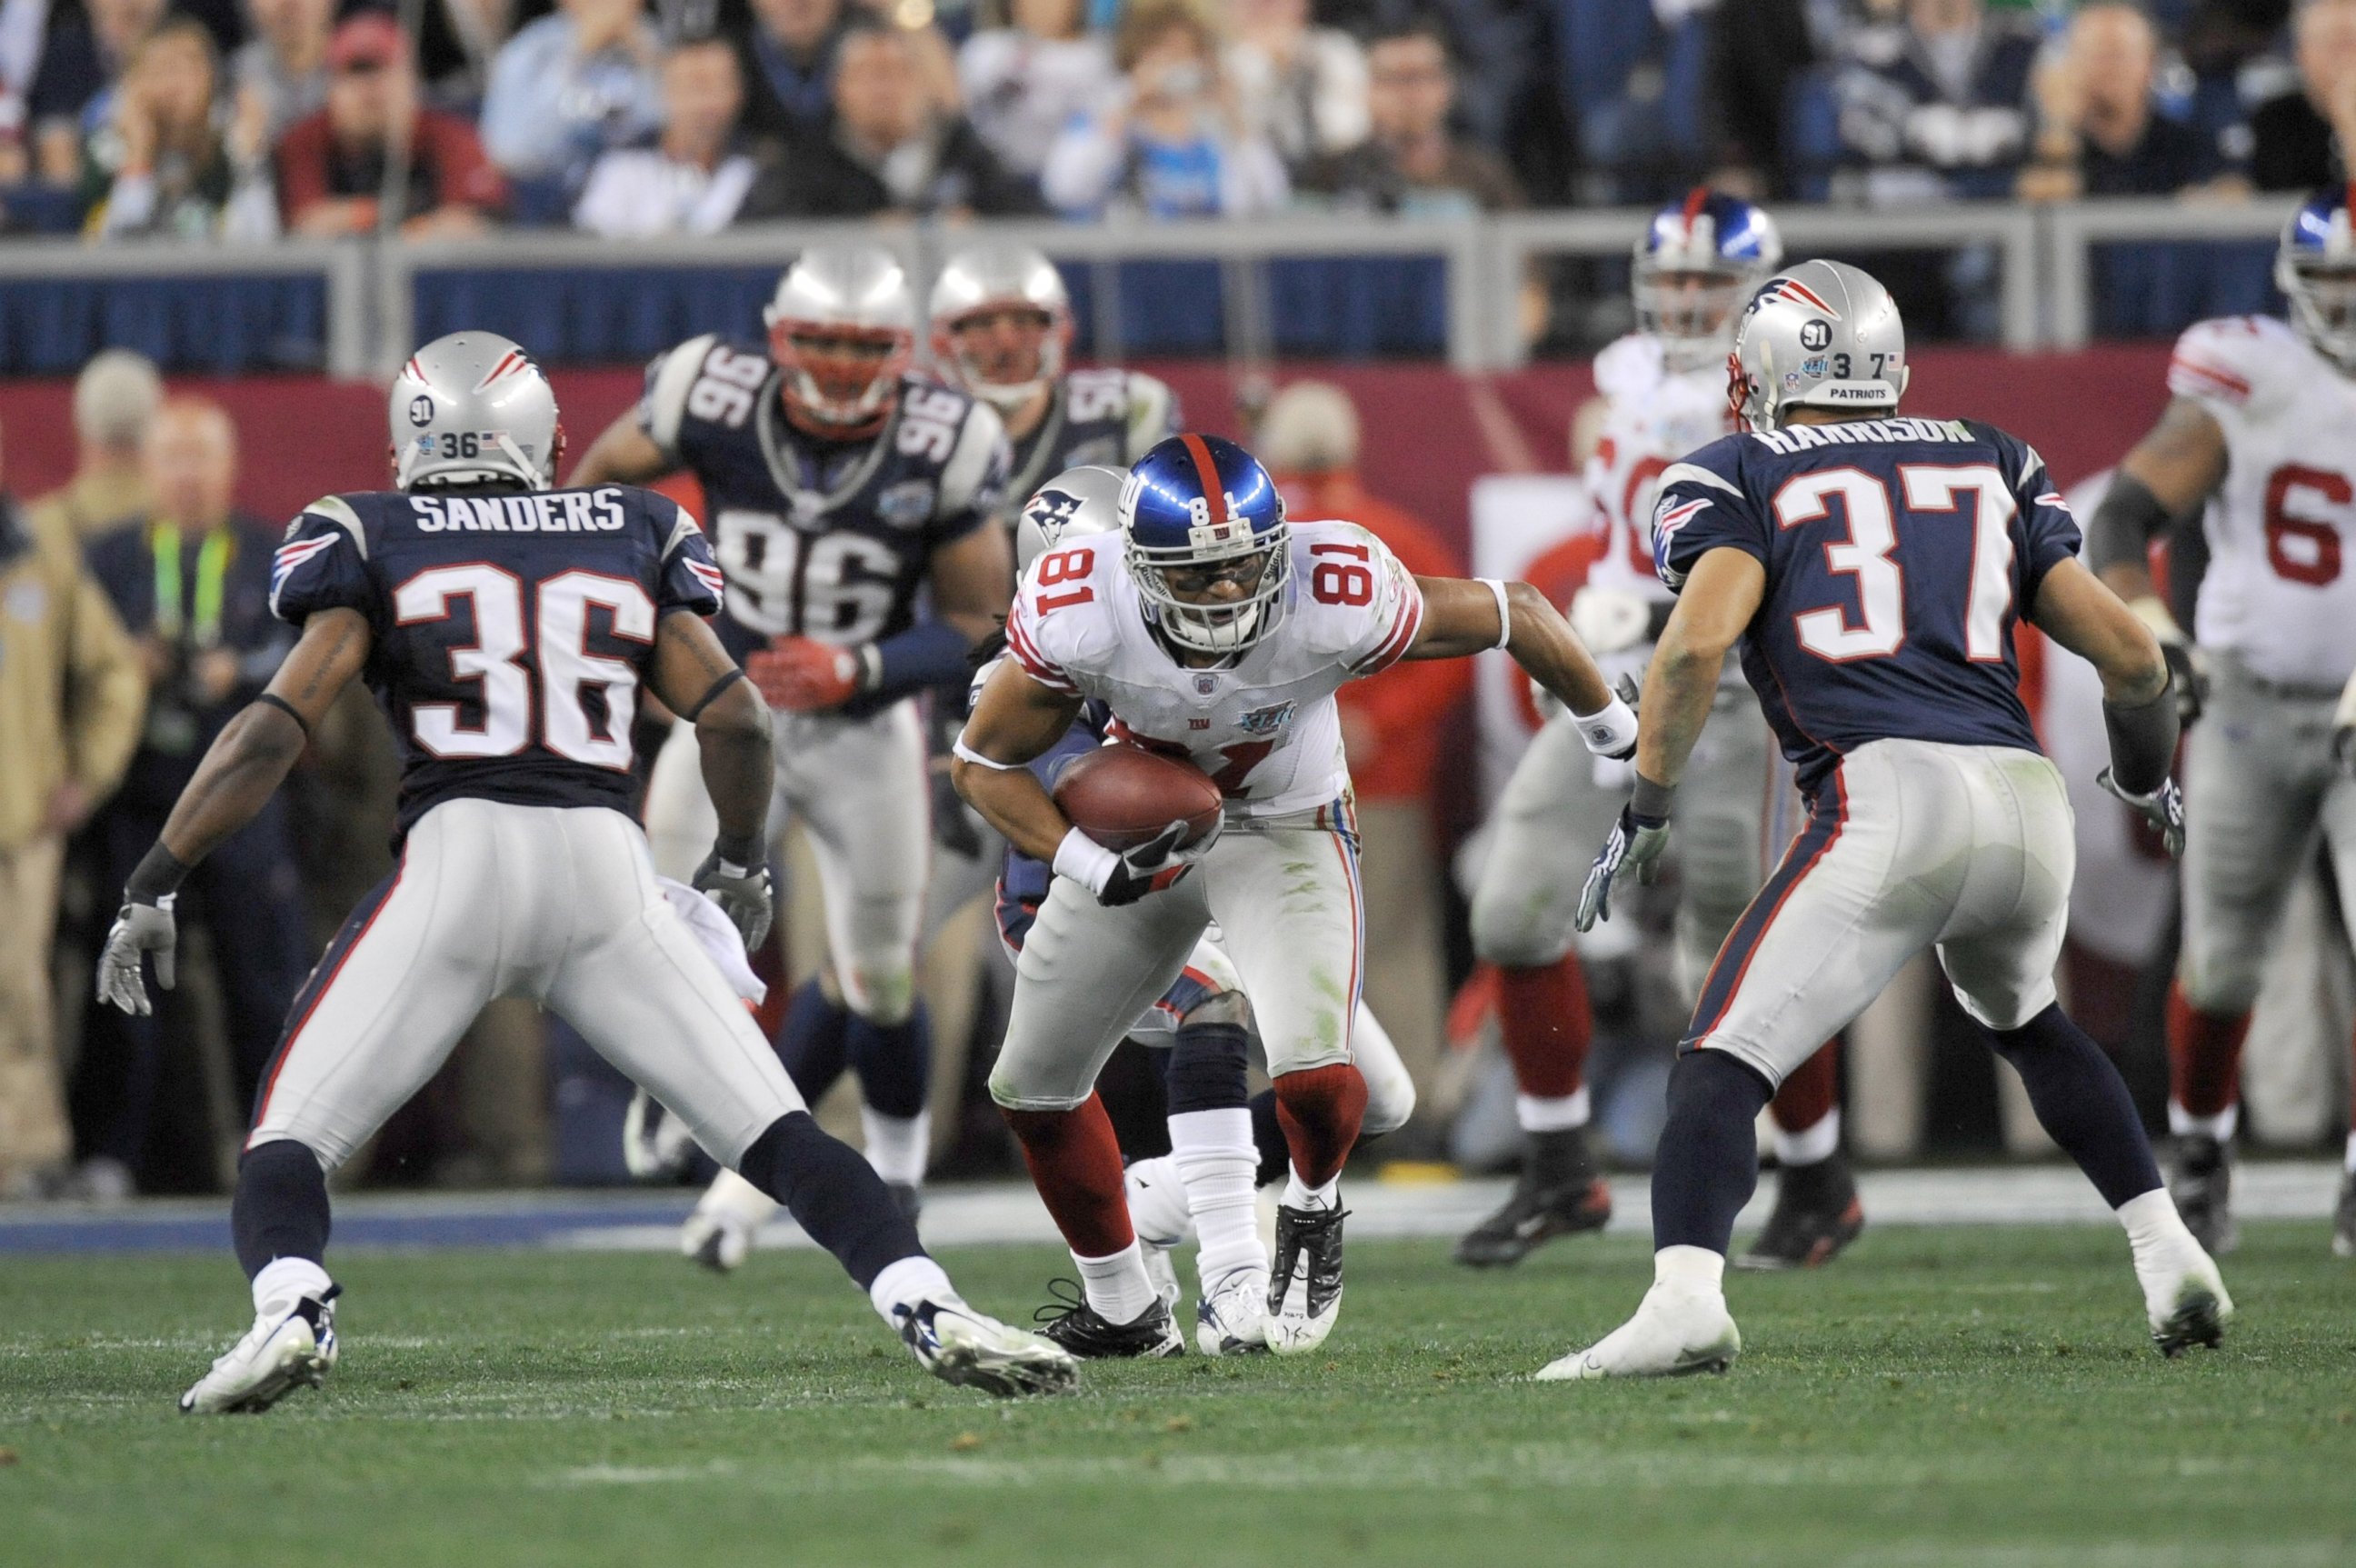 PHOTO: Amani Toomer of the New York Giants runs with the ball during Super Bowl XLII